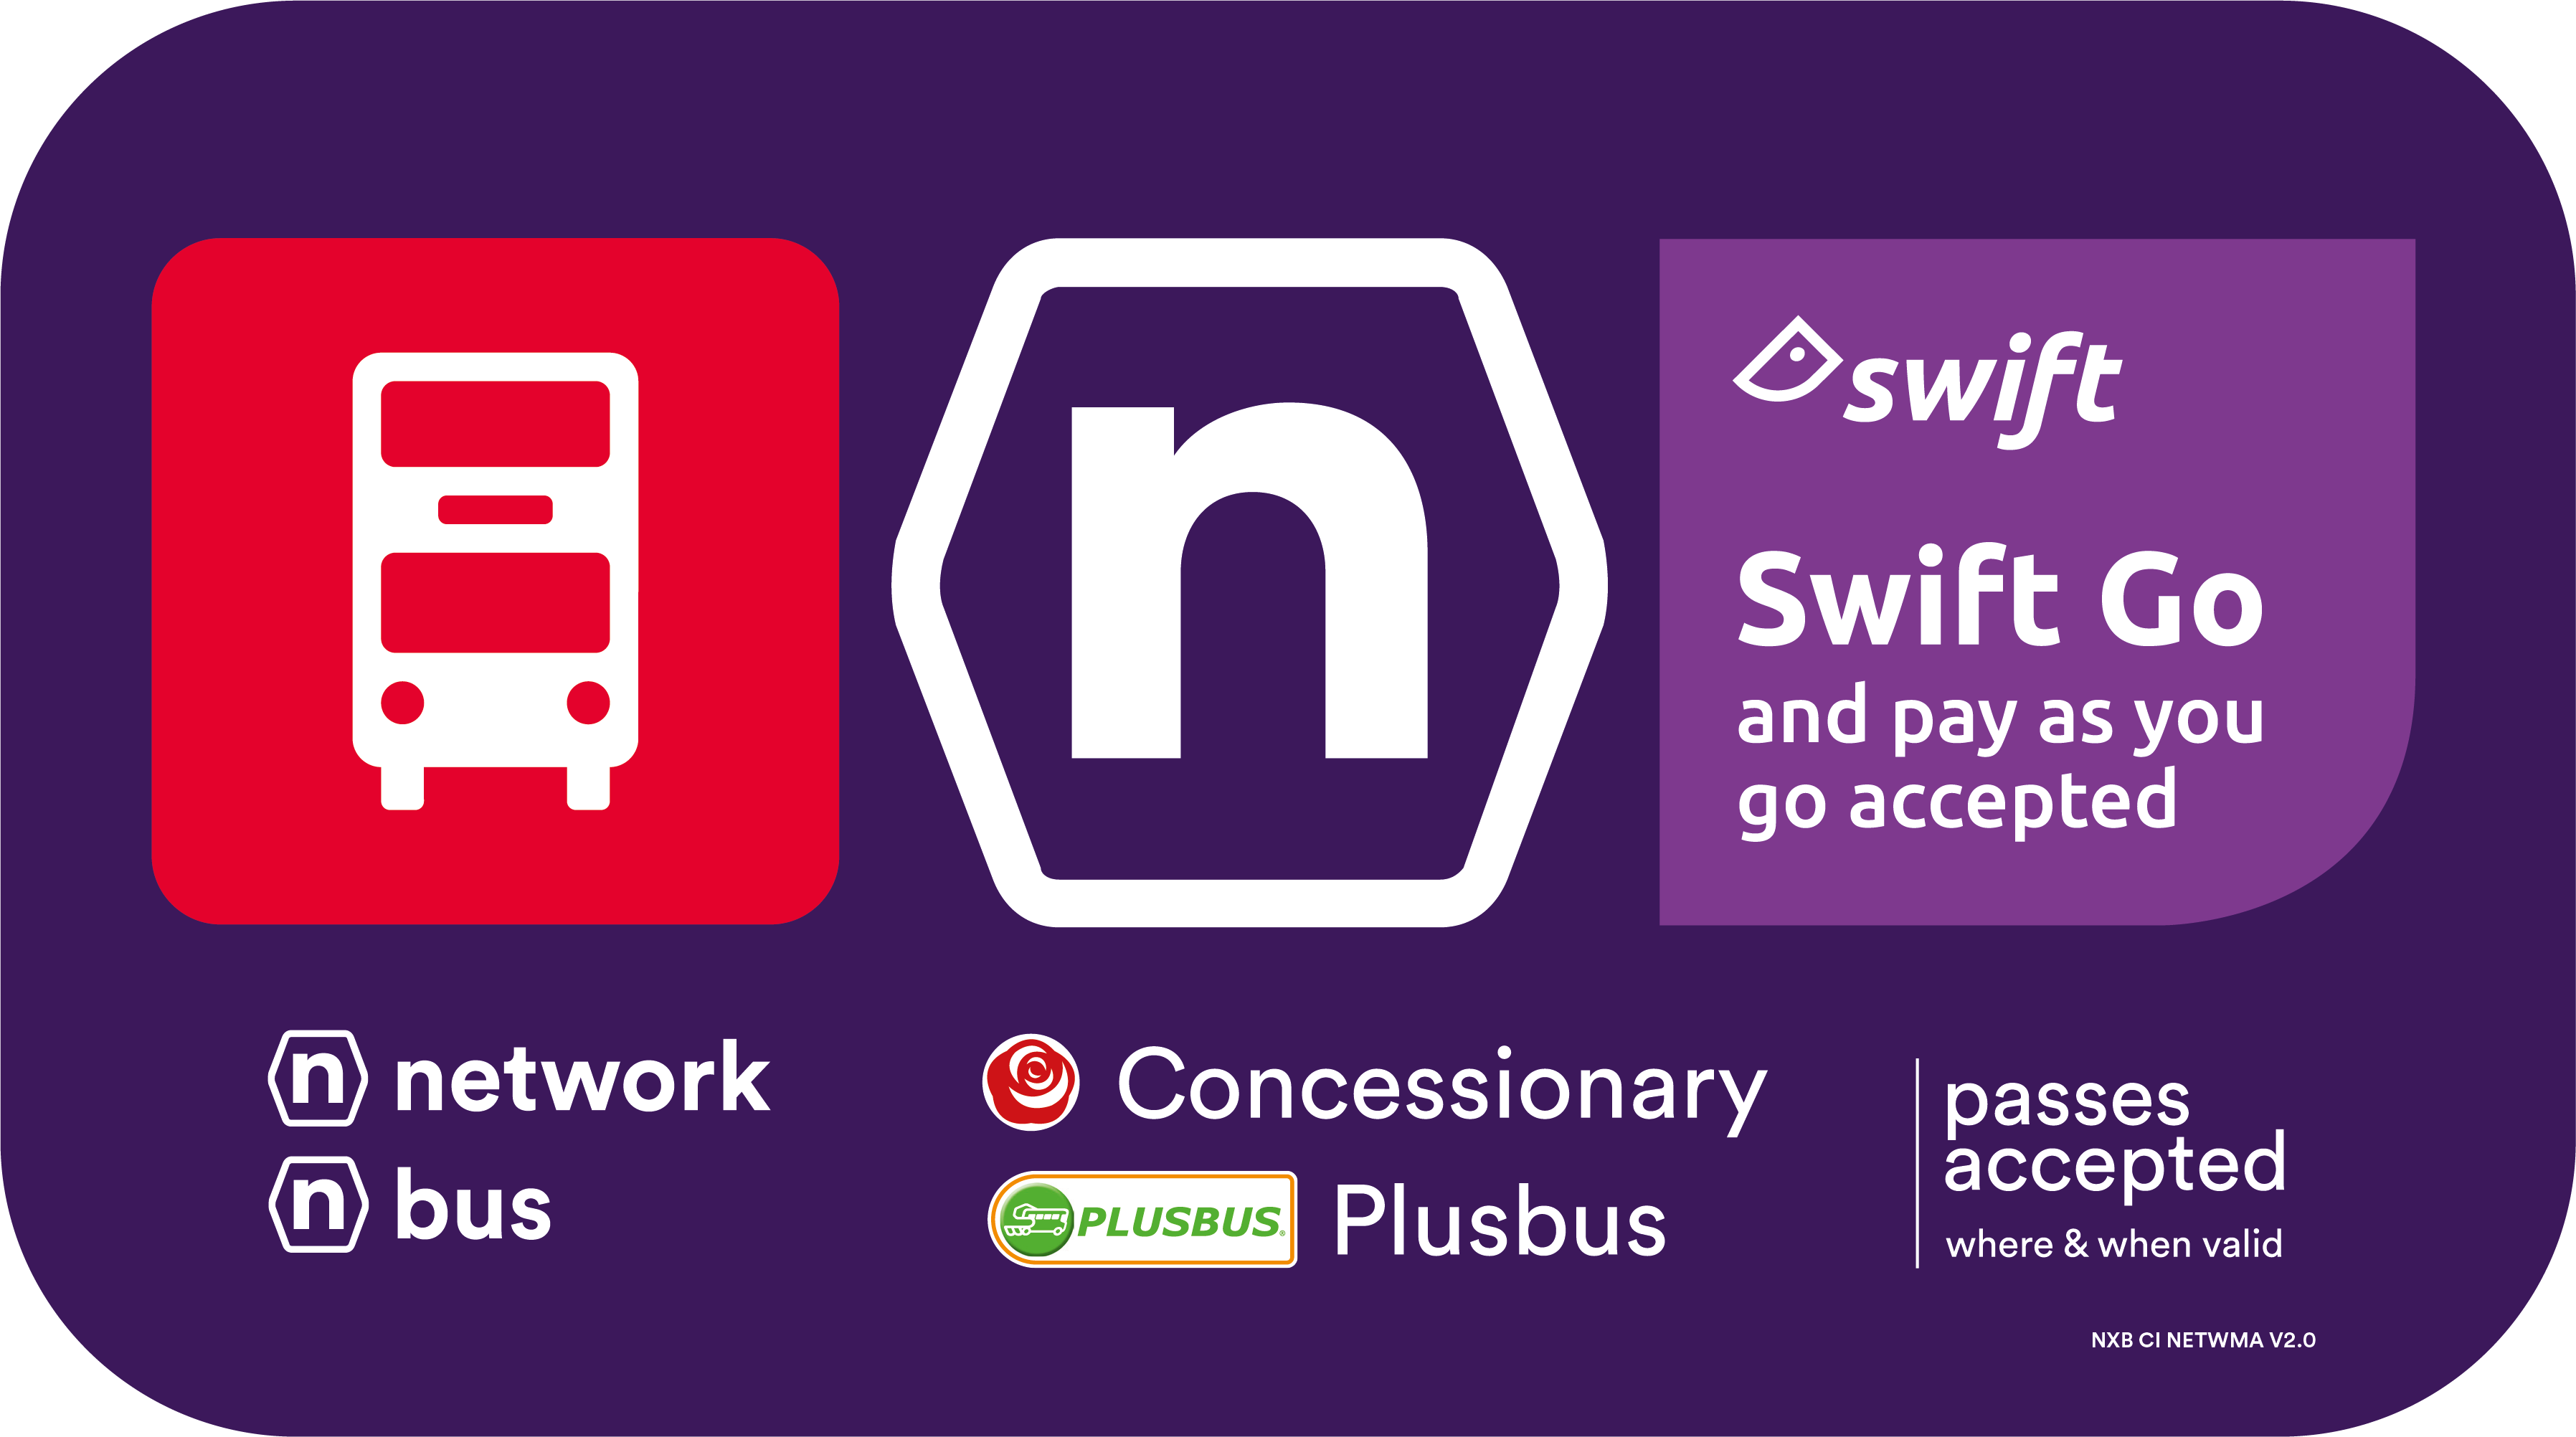 Purple sticker with a 'Swift Go Accepted' notice. This sticker is shown on the side of a bus.